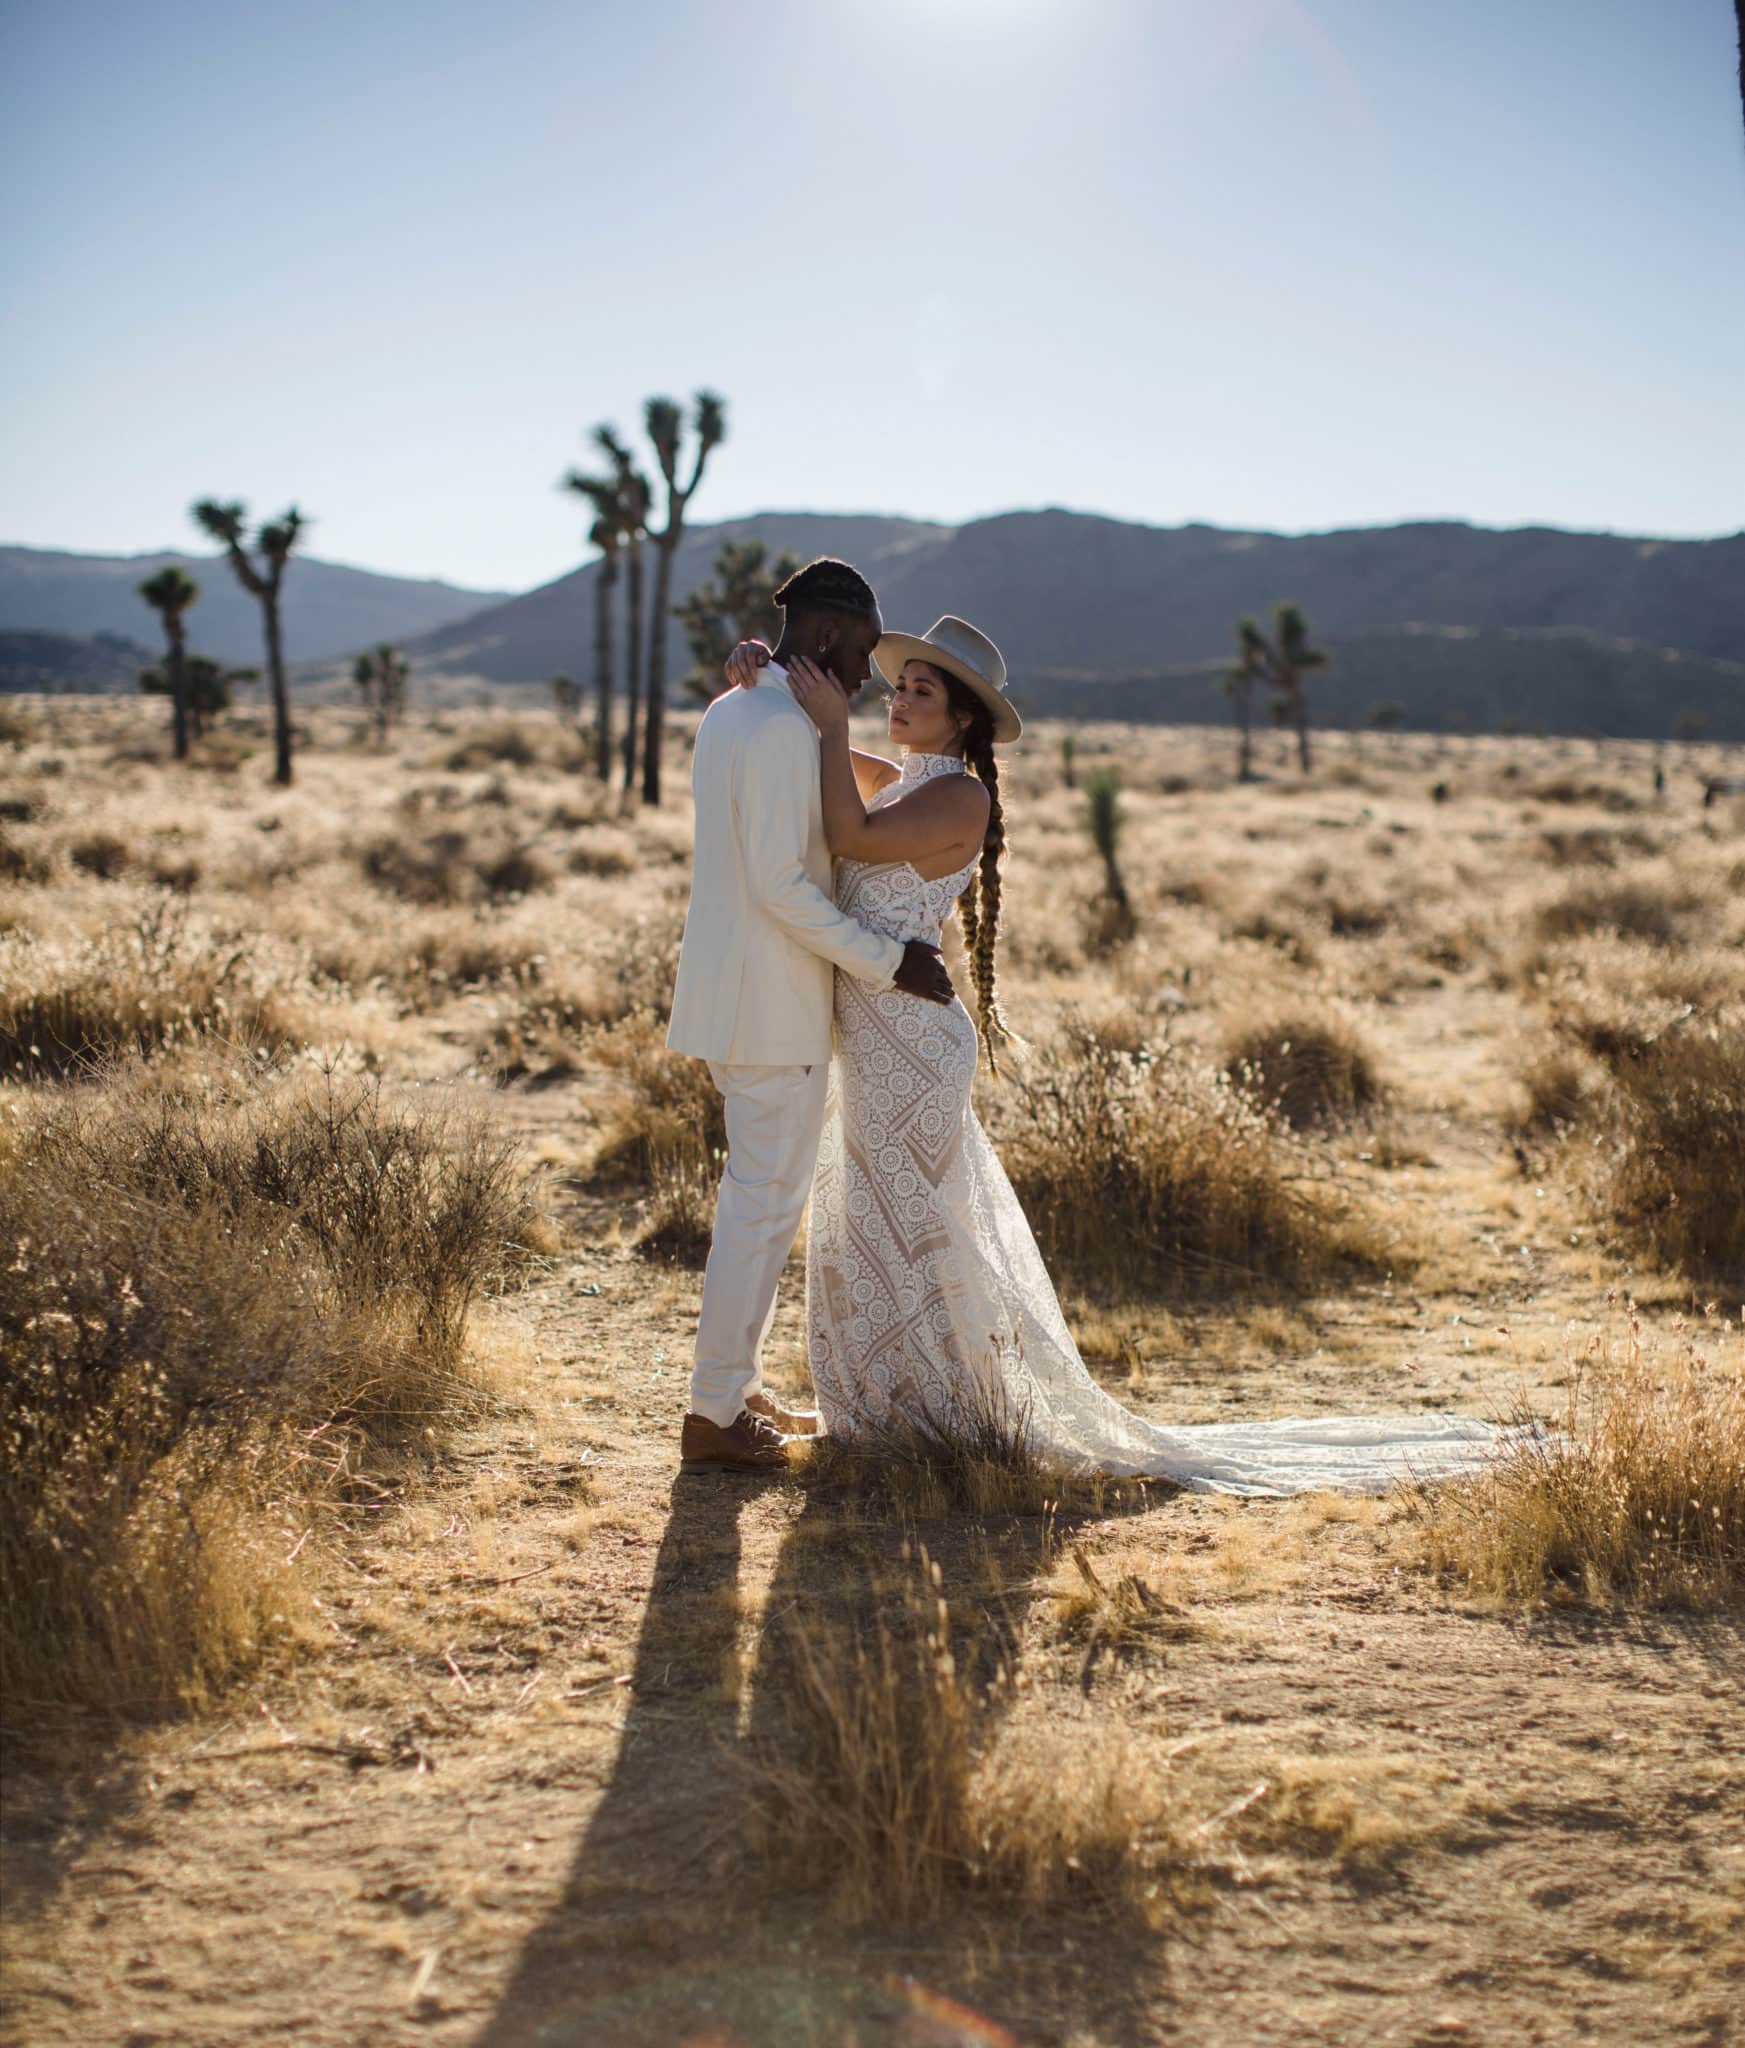 A couple chose to get married in a national park by a California elopement photographer, one of the best places to elope.